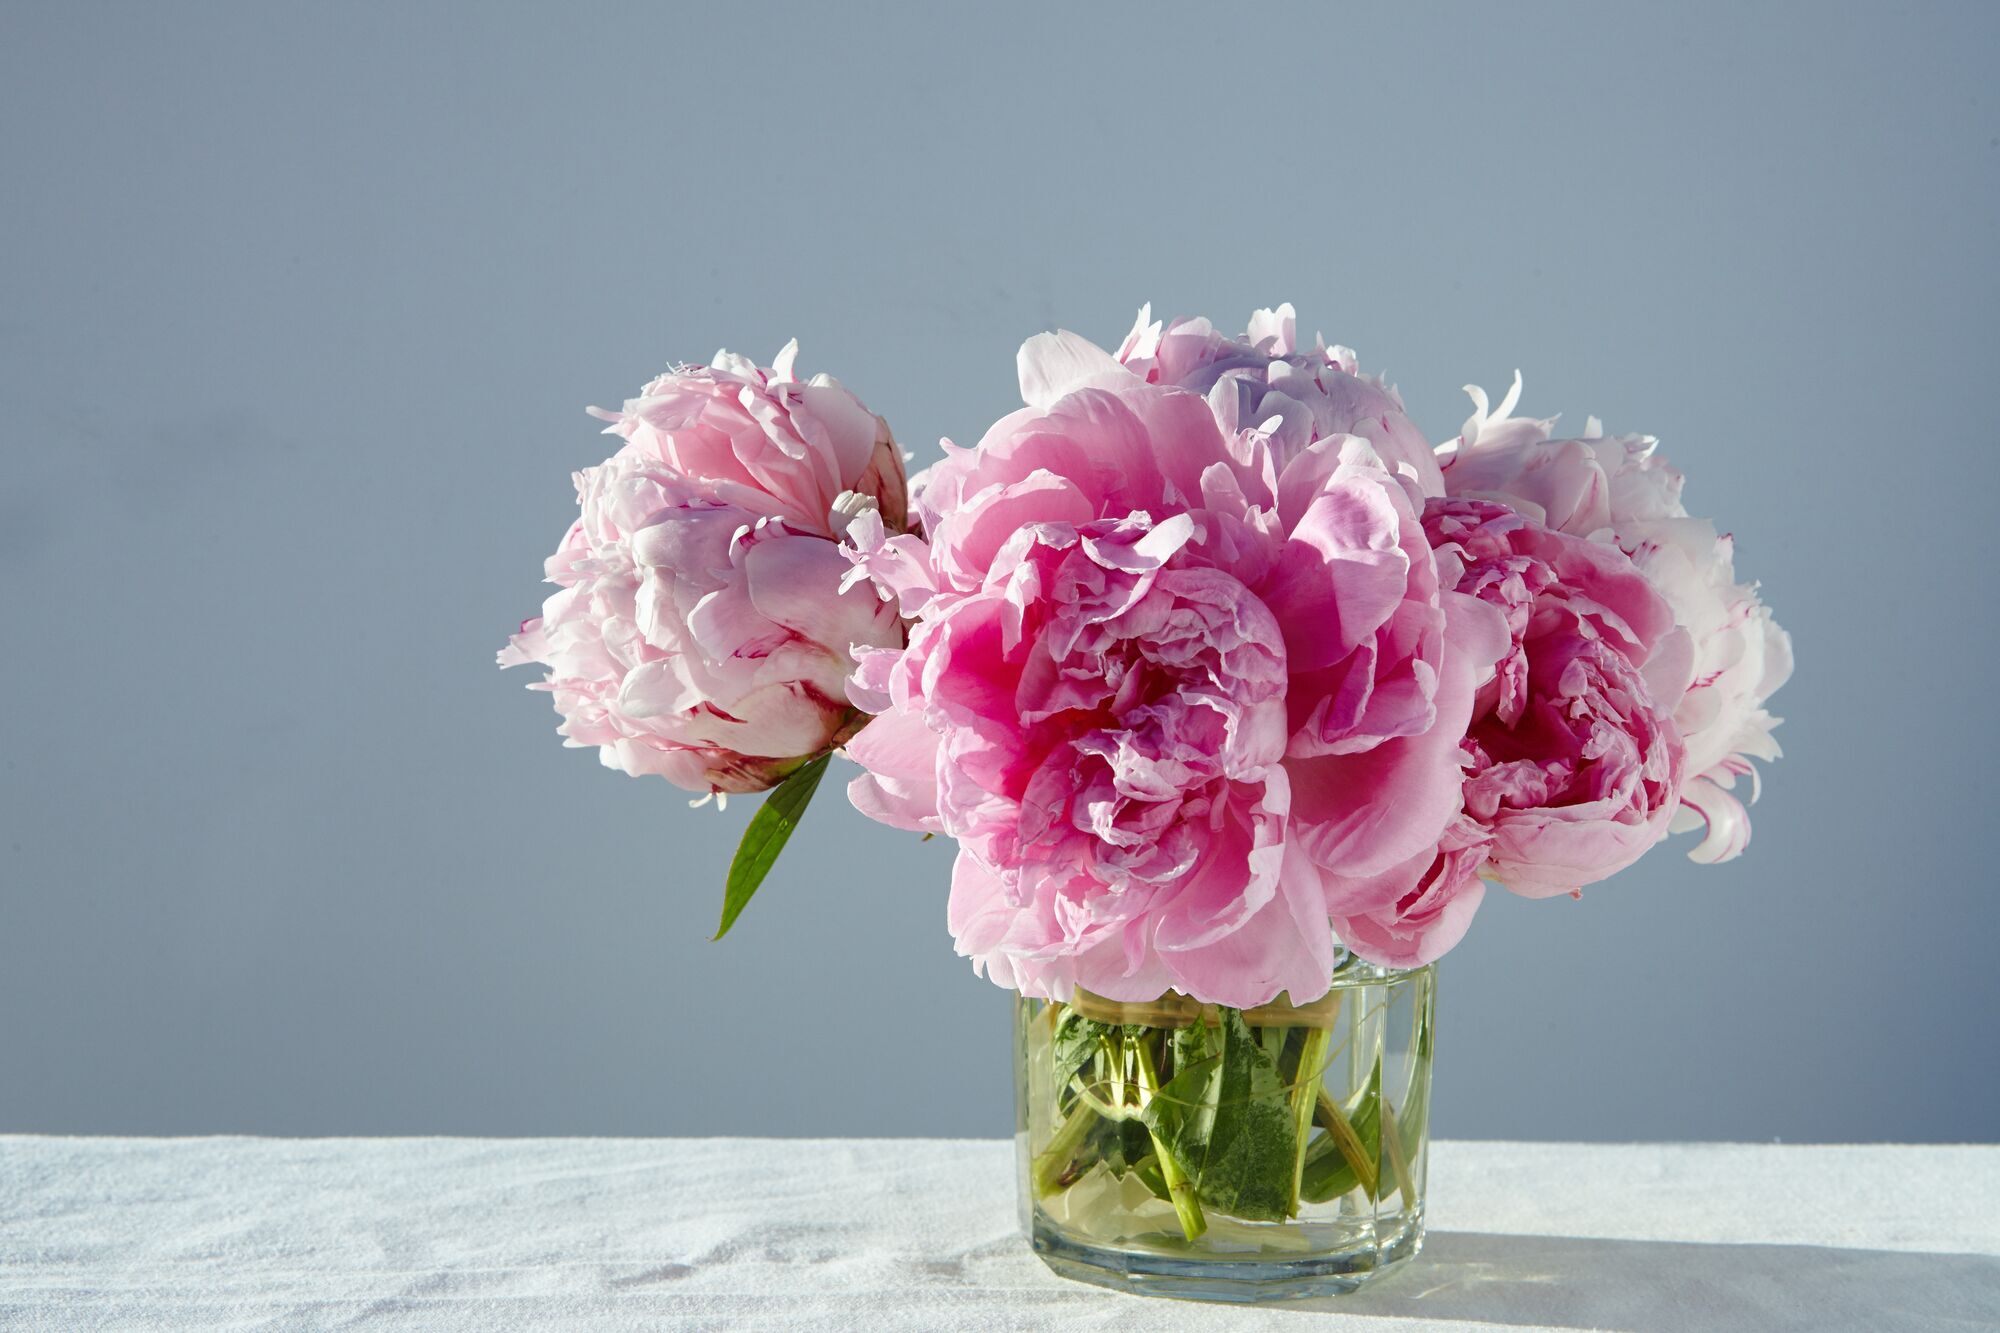 How to grow peonies with giant flowers at home: tips